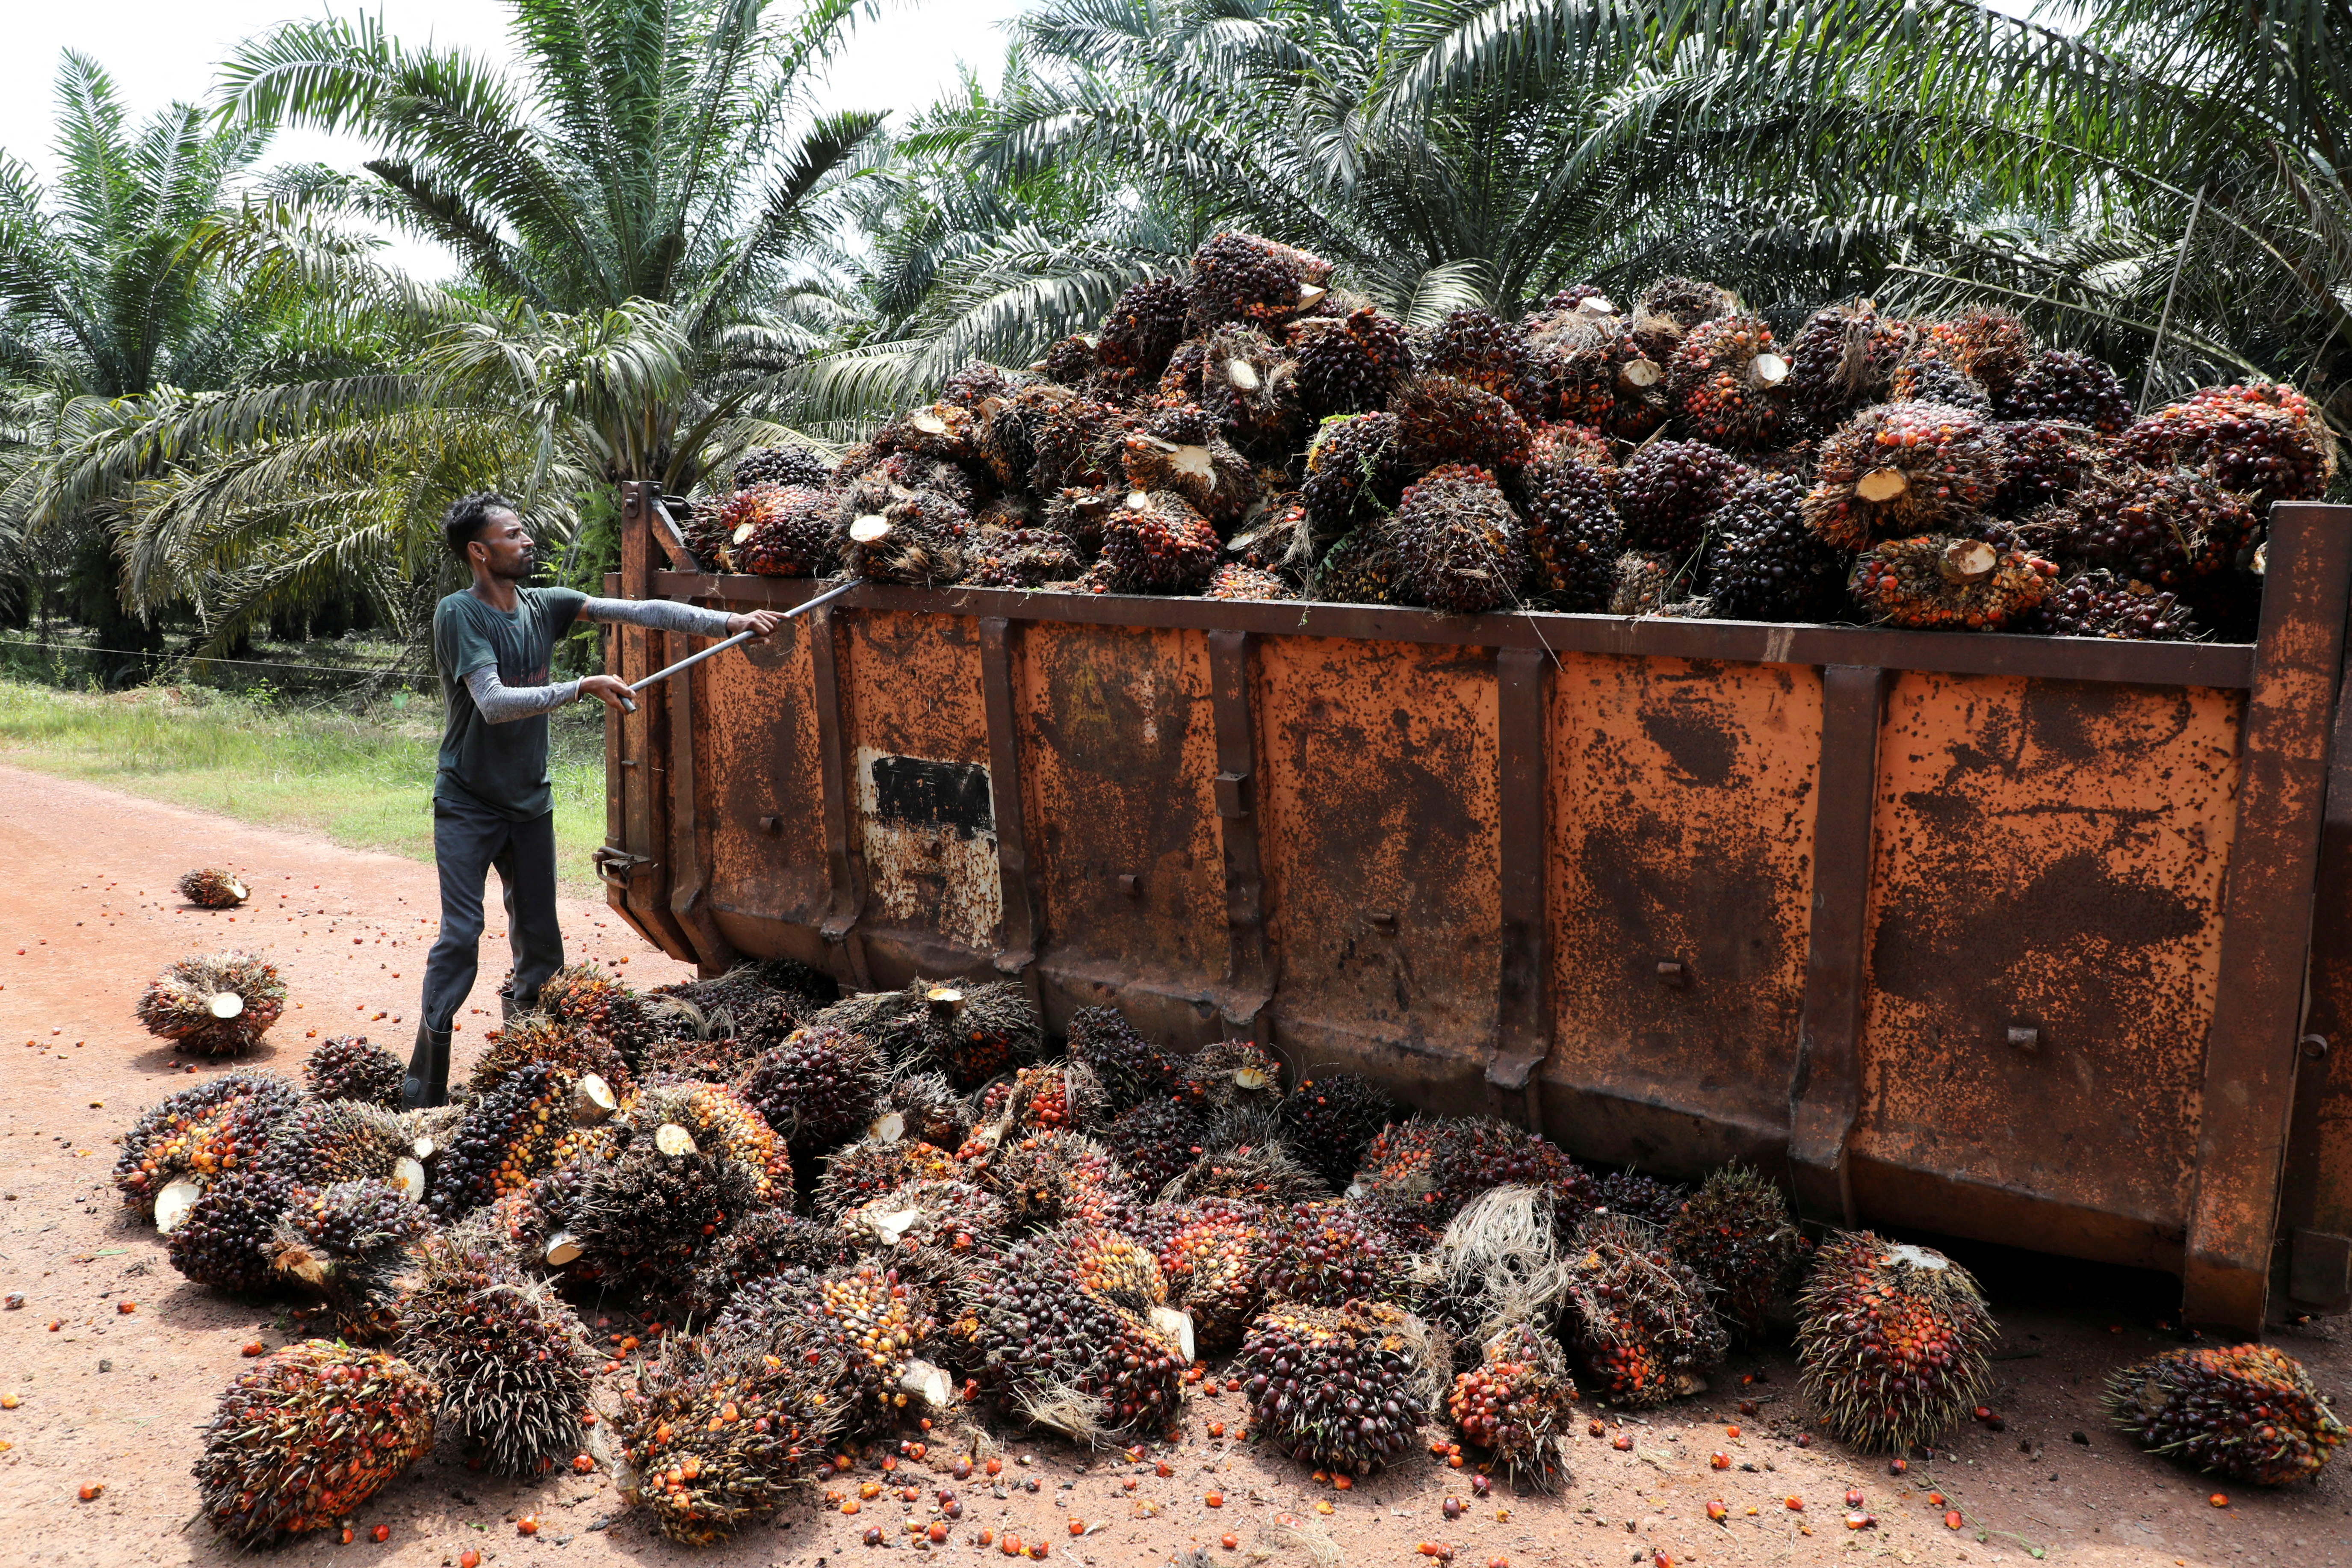 Worker loads palm oil fruit bunches at a plantation in Slim River